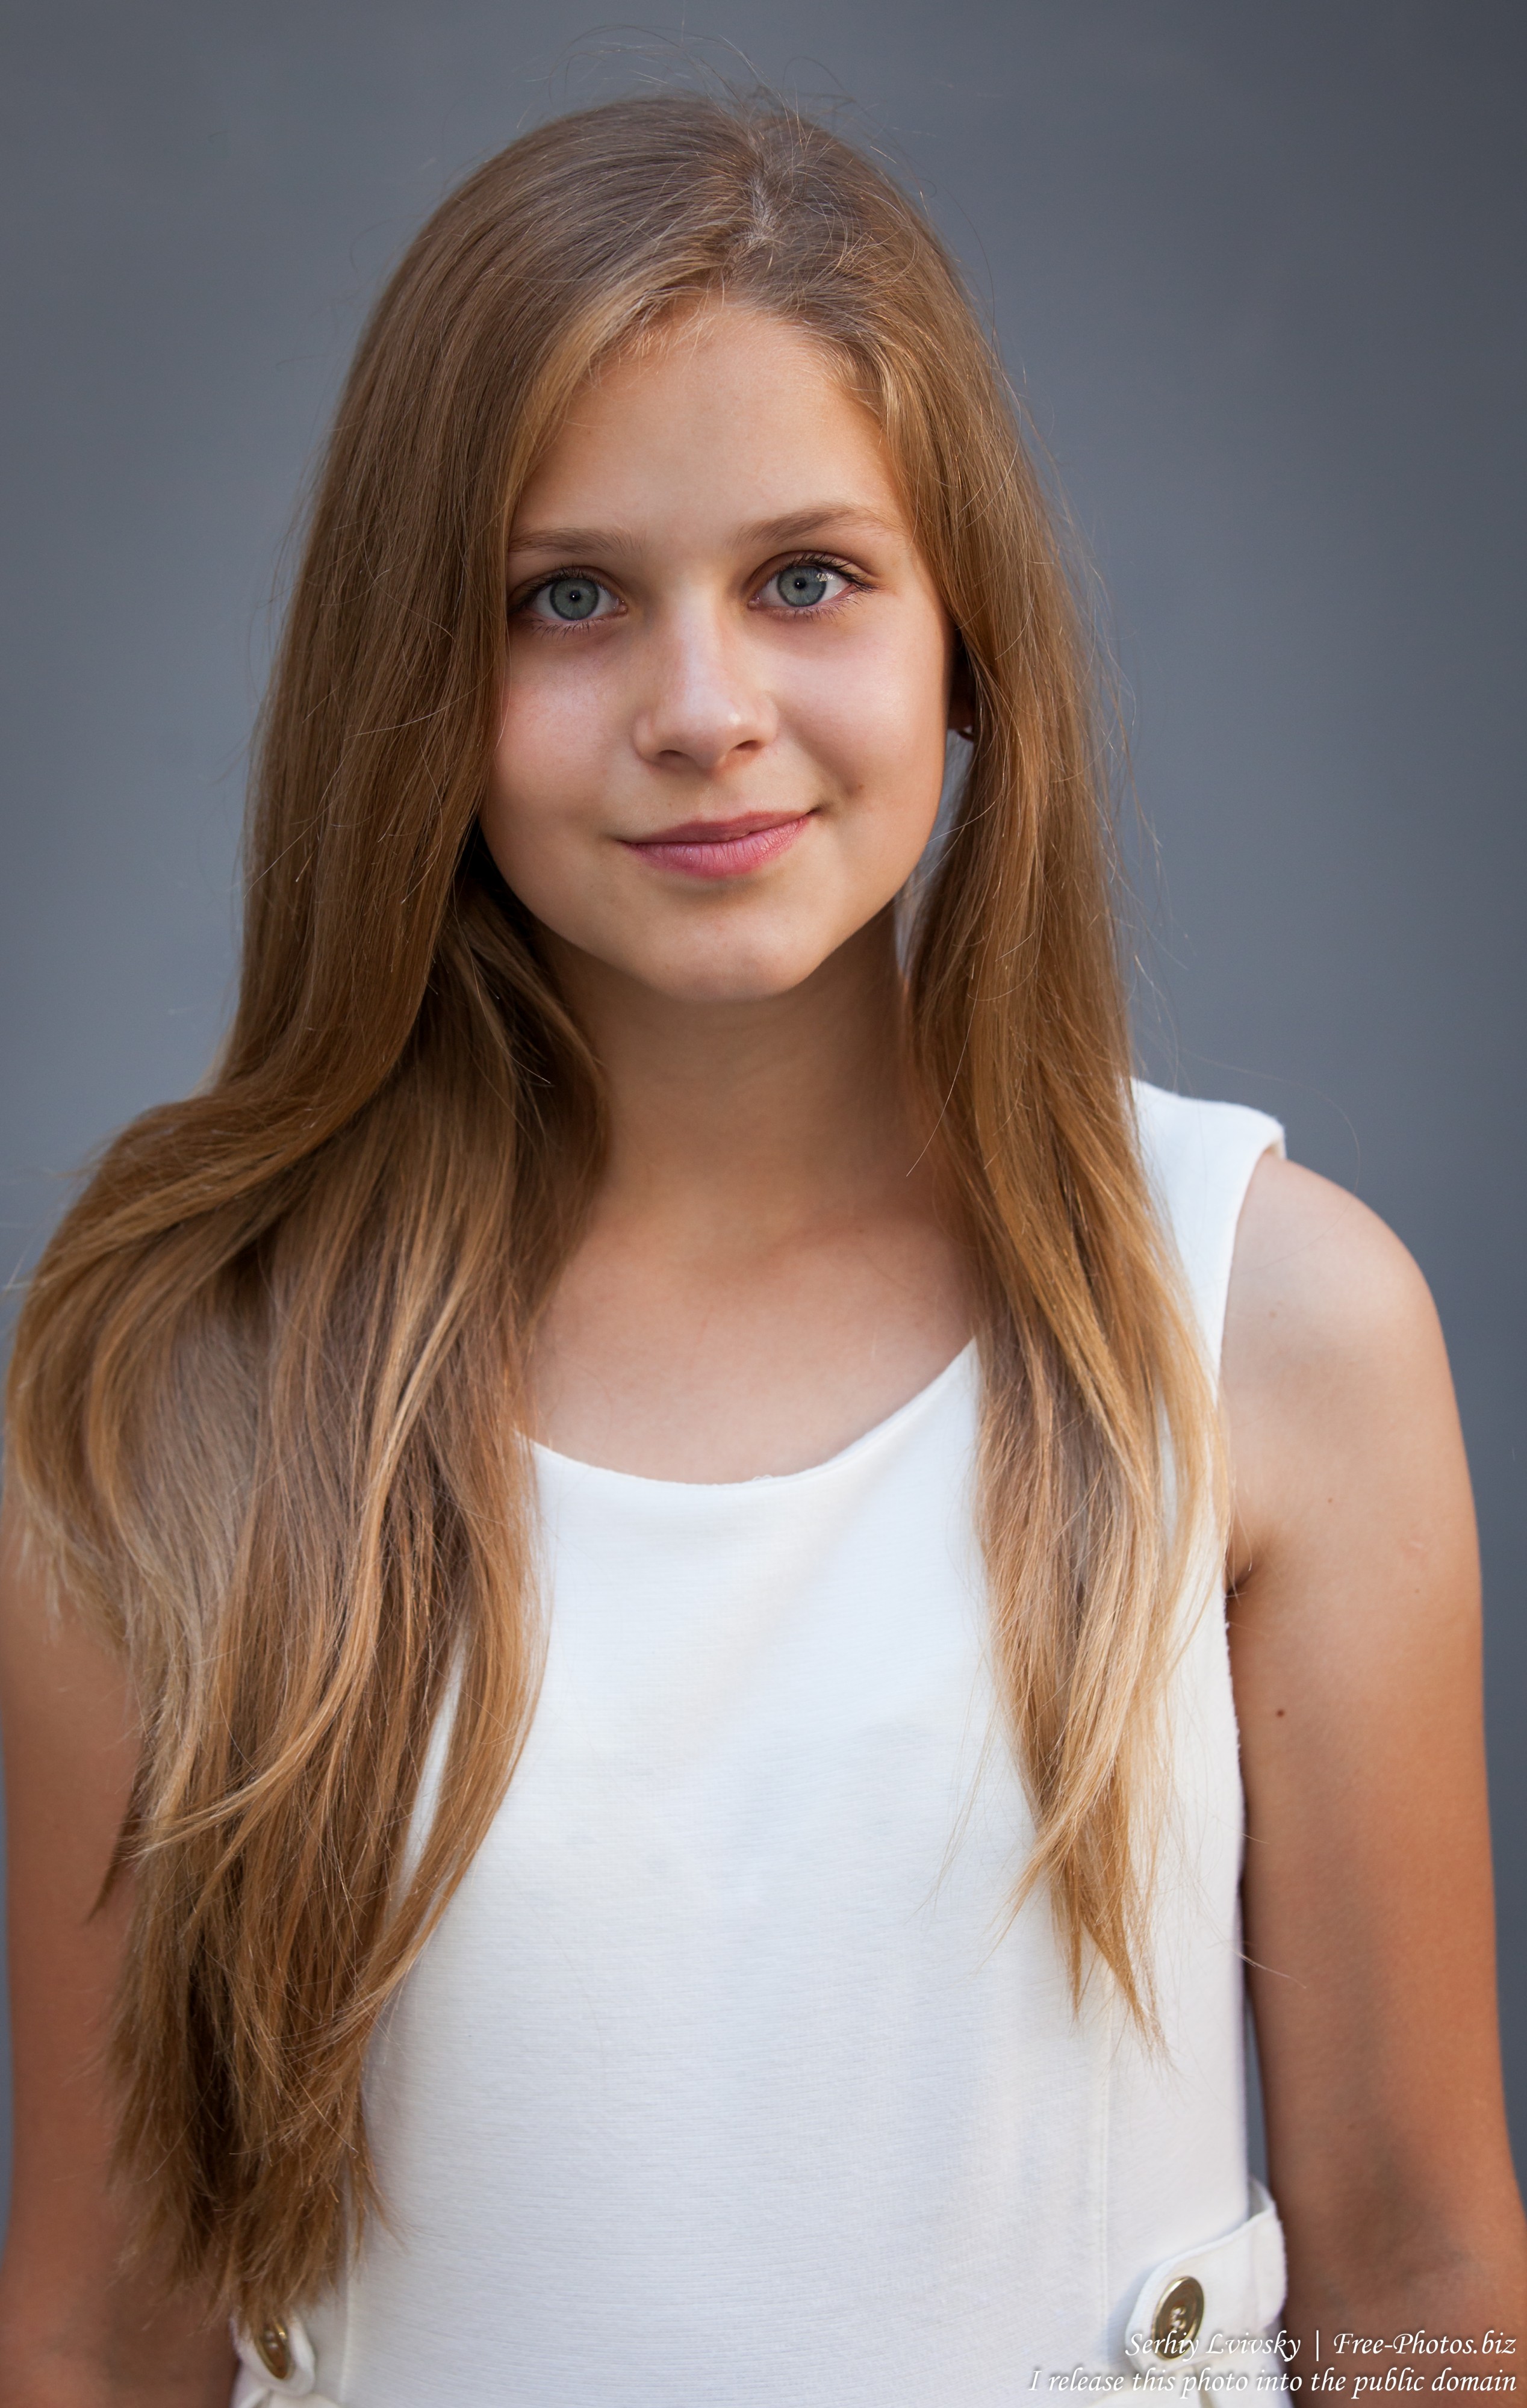 photo-of-a-12-year-old-blond-girl-wearing-a-white-dress-photographed-in